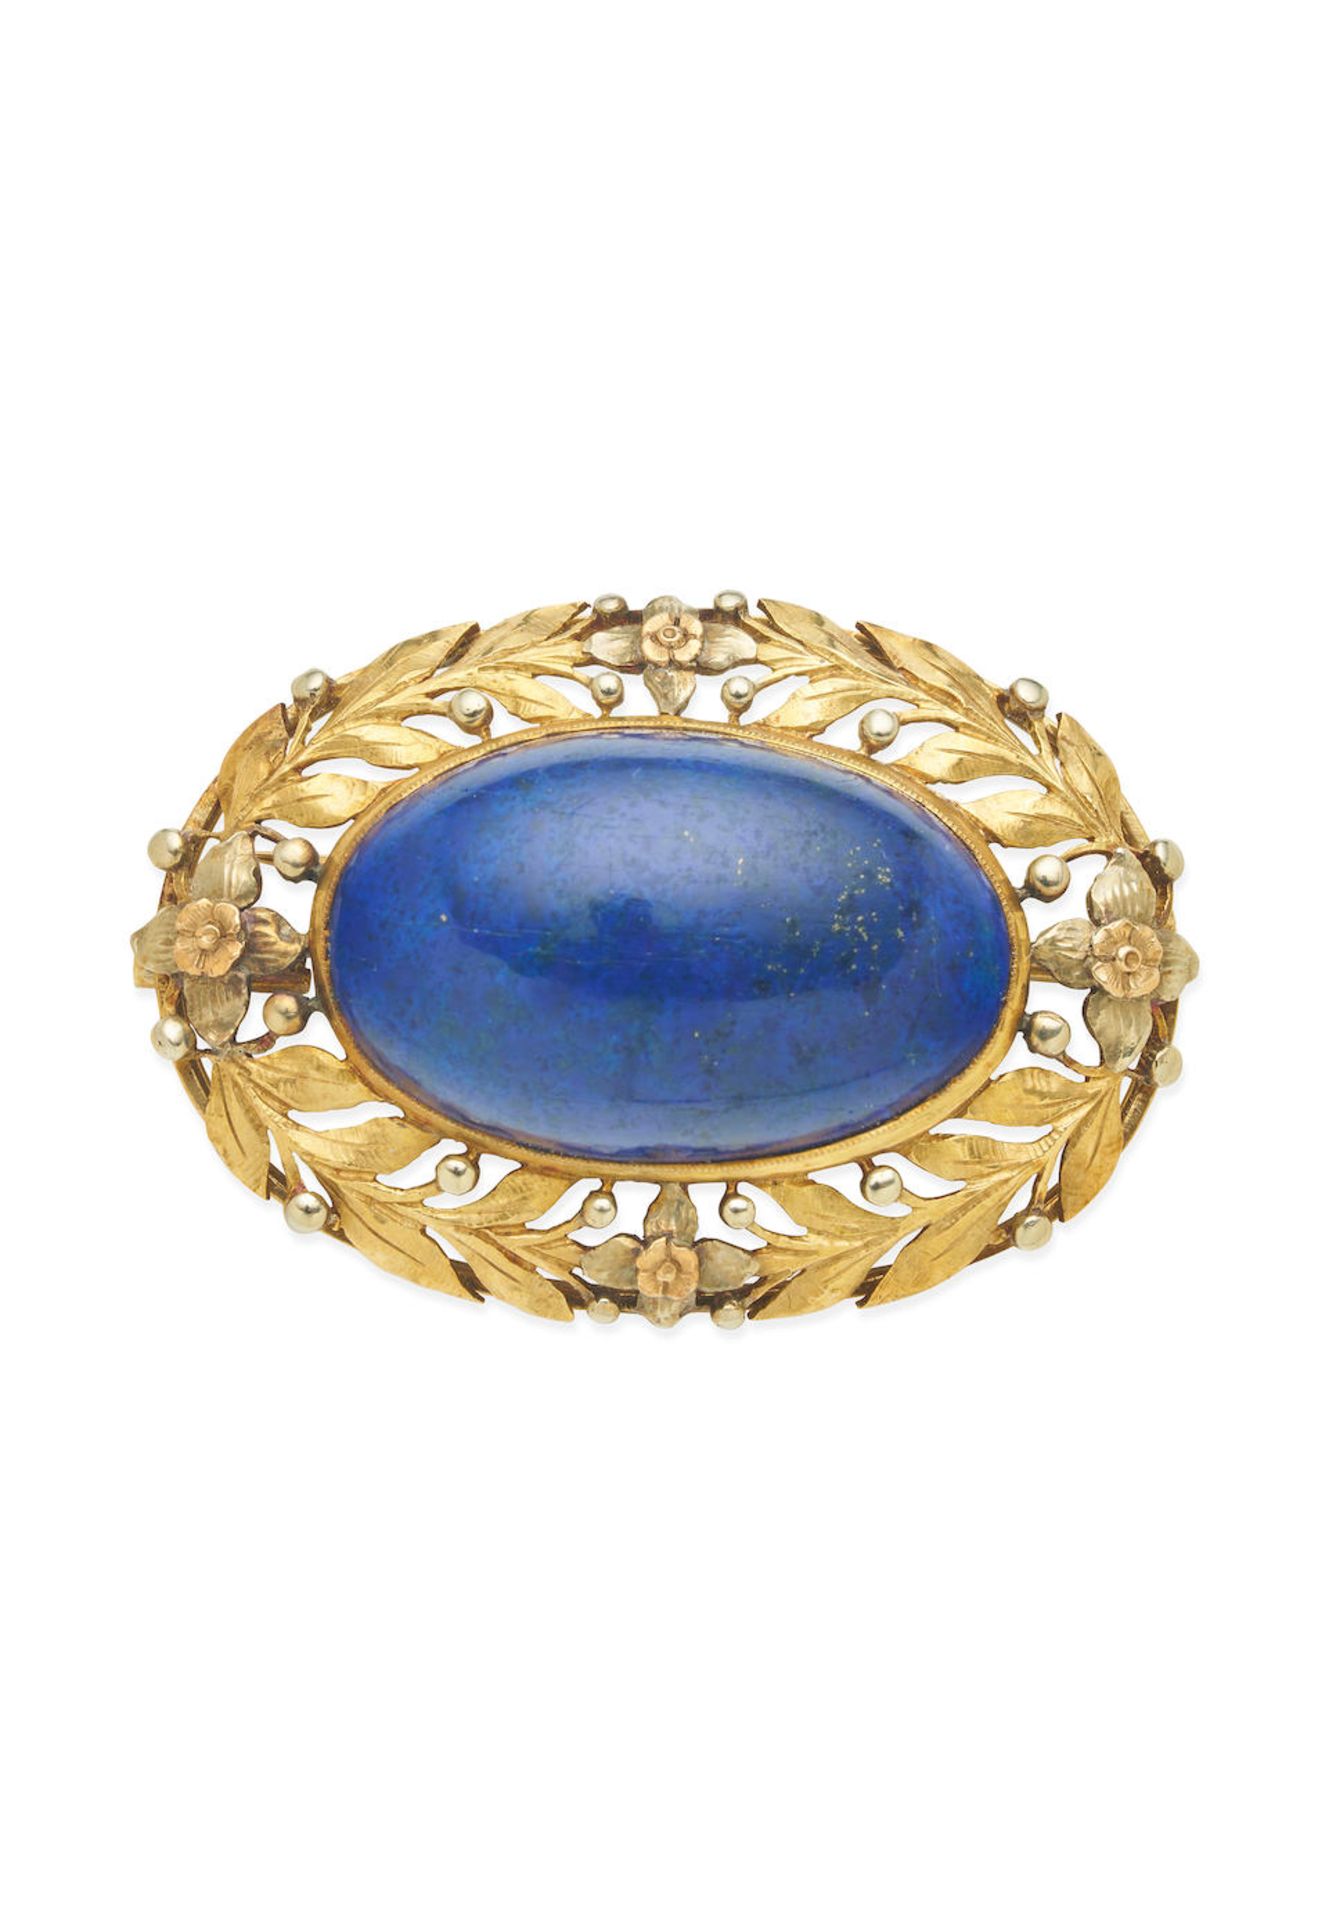 LAPIS LAZULI AND GOLD BROOCH